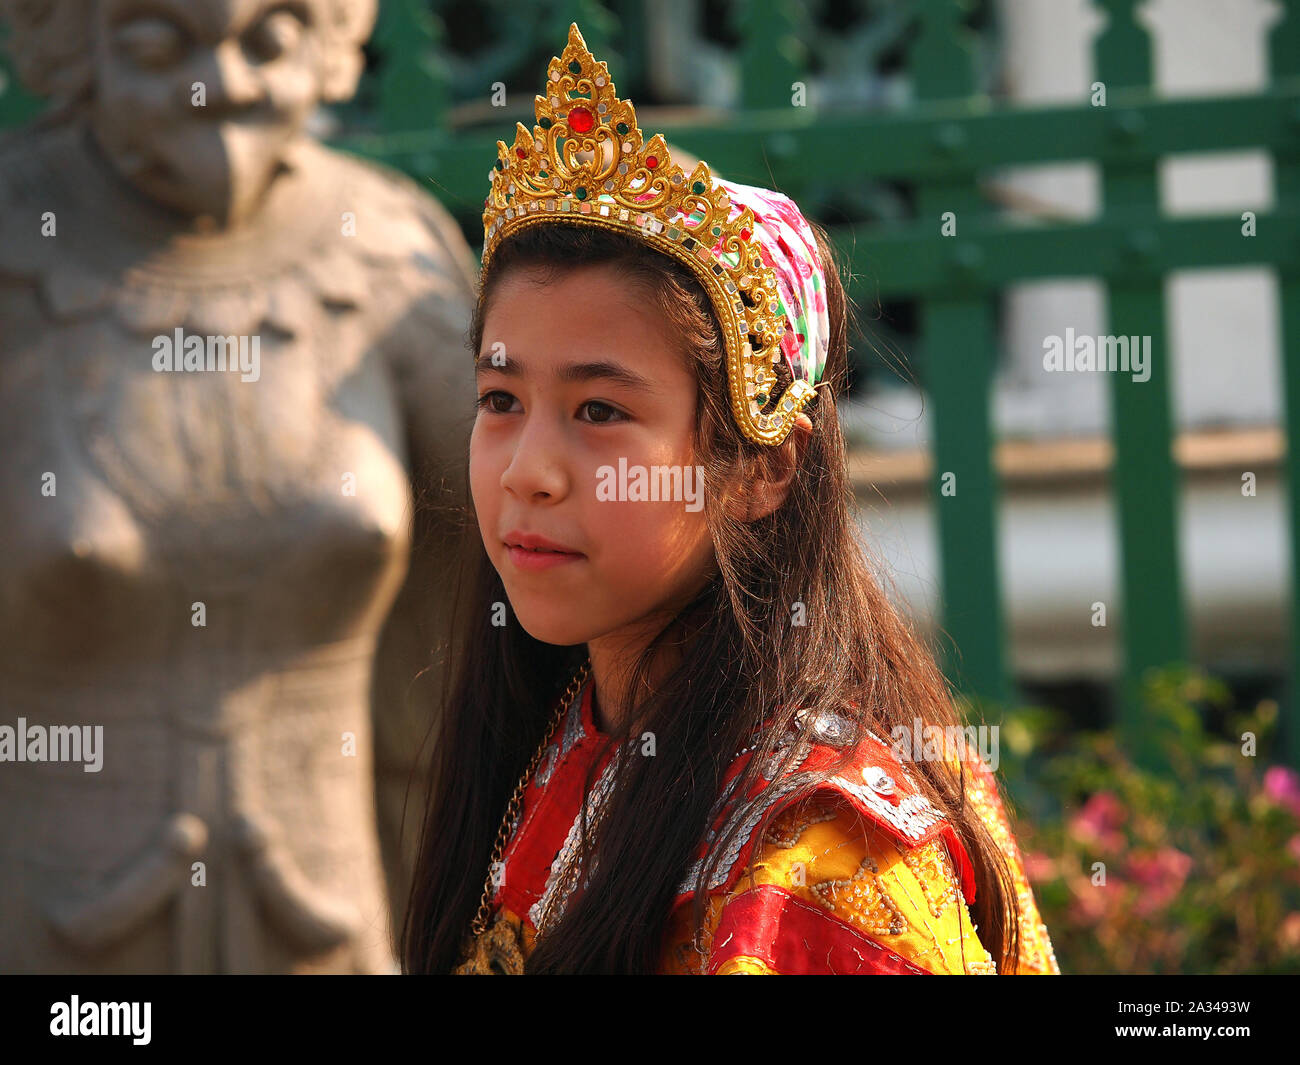 thair woman in traditional dress and crown Stock Photo